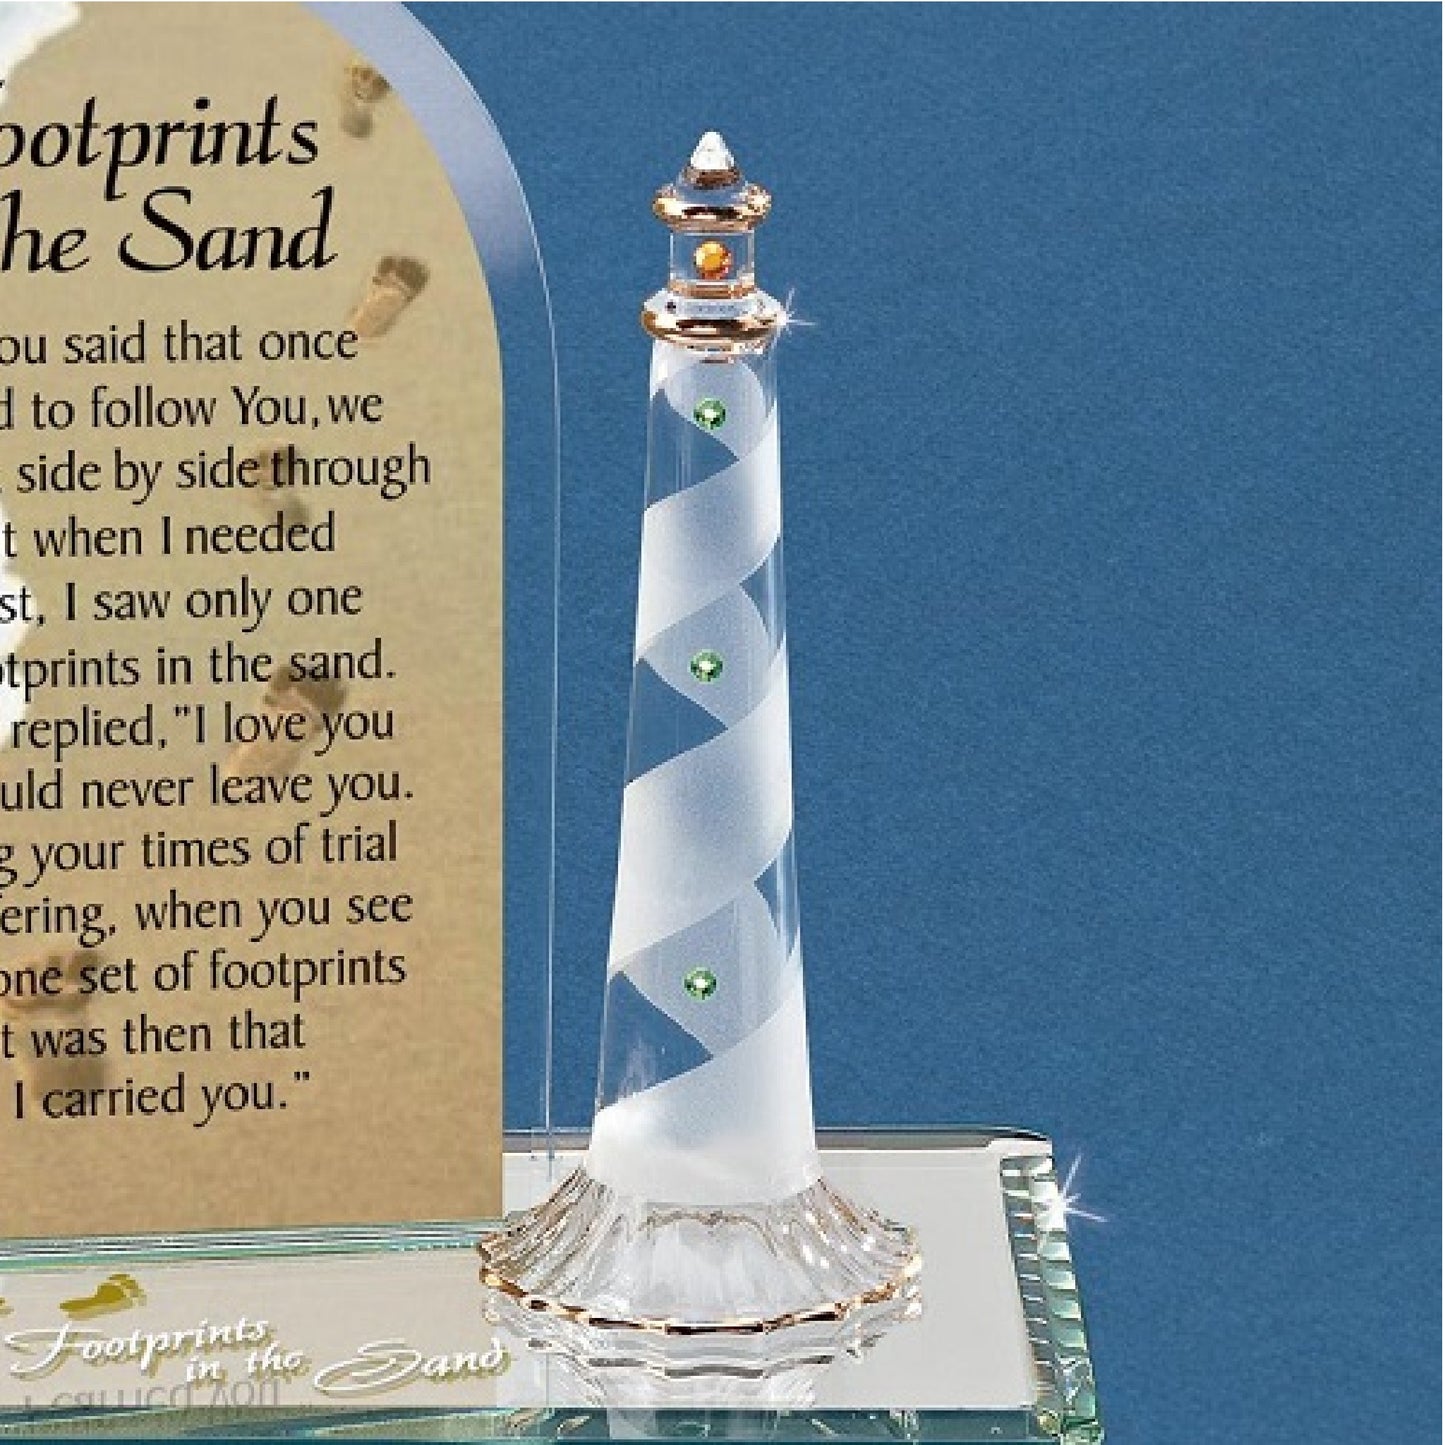 Glass Baron Footprints in the Sand Figurine Plaque